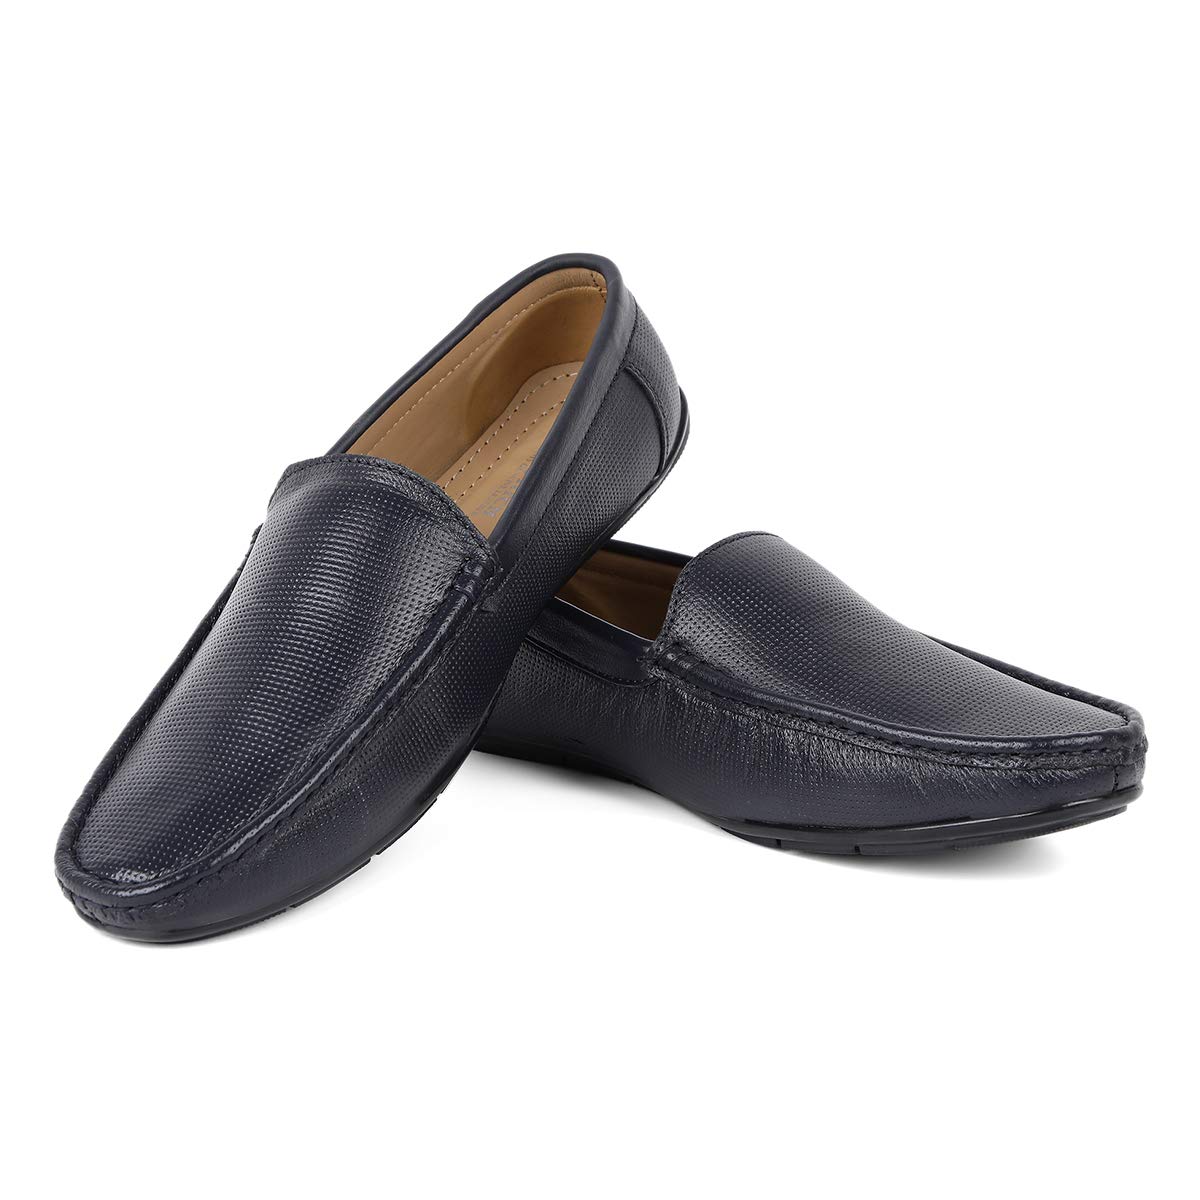 LOUIS STITCH Oxford Blue Genuine Leather Moccasins Loafers for Men